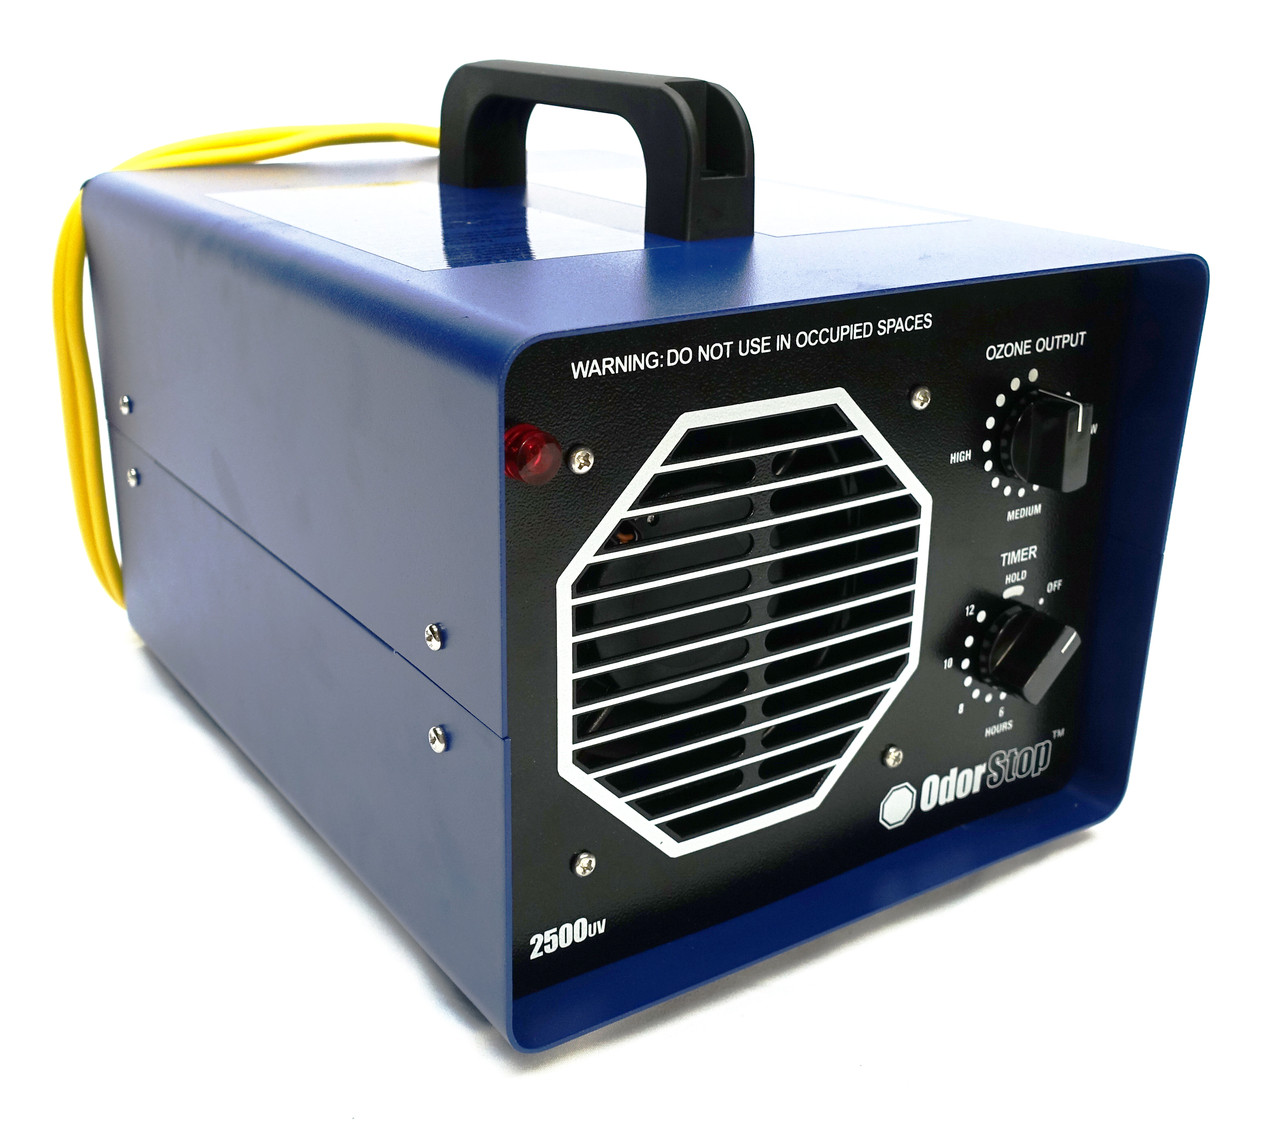 New Design! Portable Ozone Generator Air Purifier Disinfection